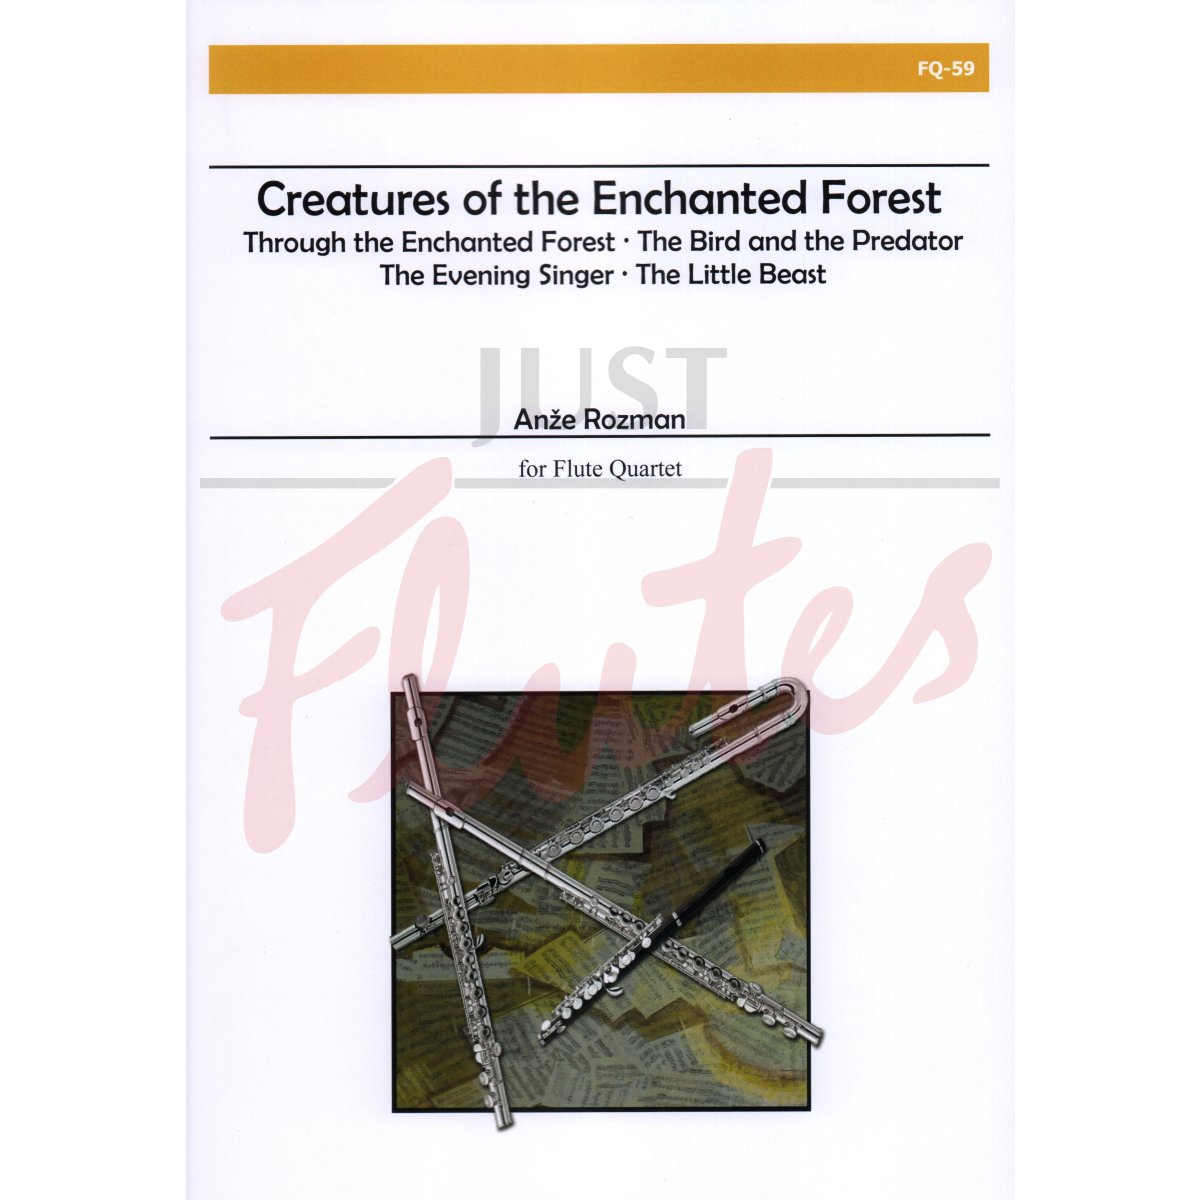 Creatures of the Enchanted Forest for Flute Quartet